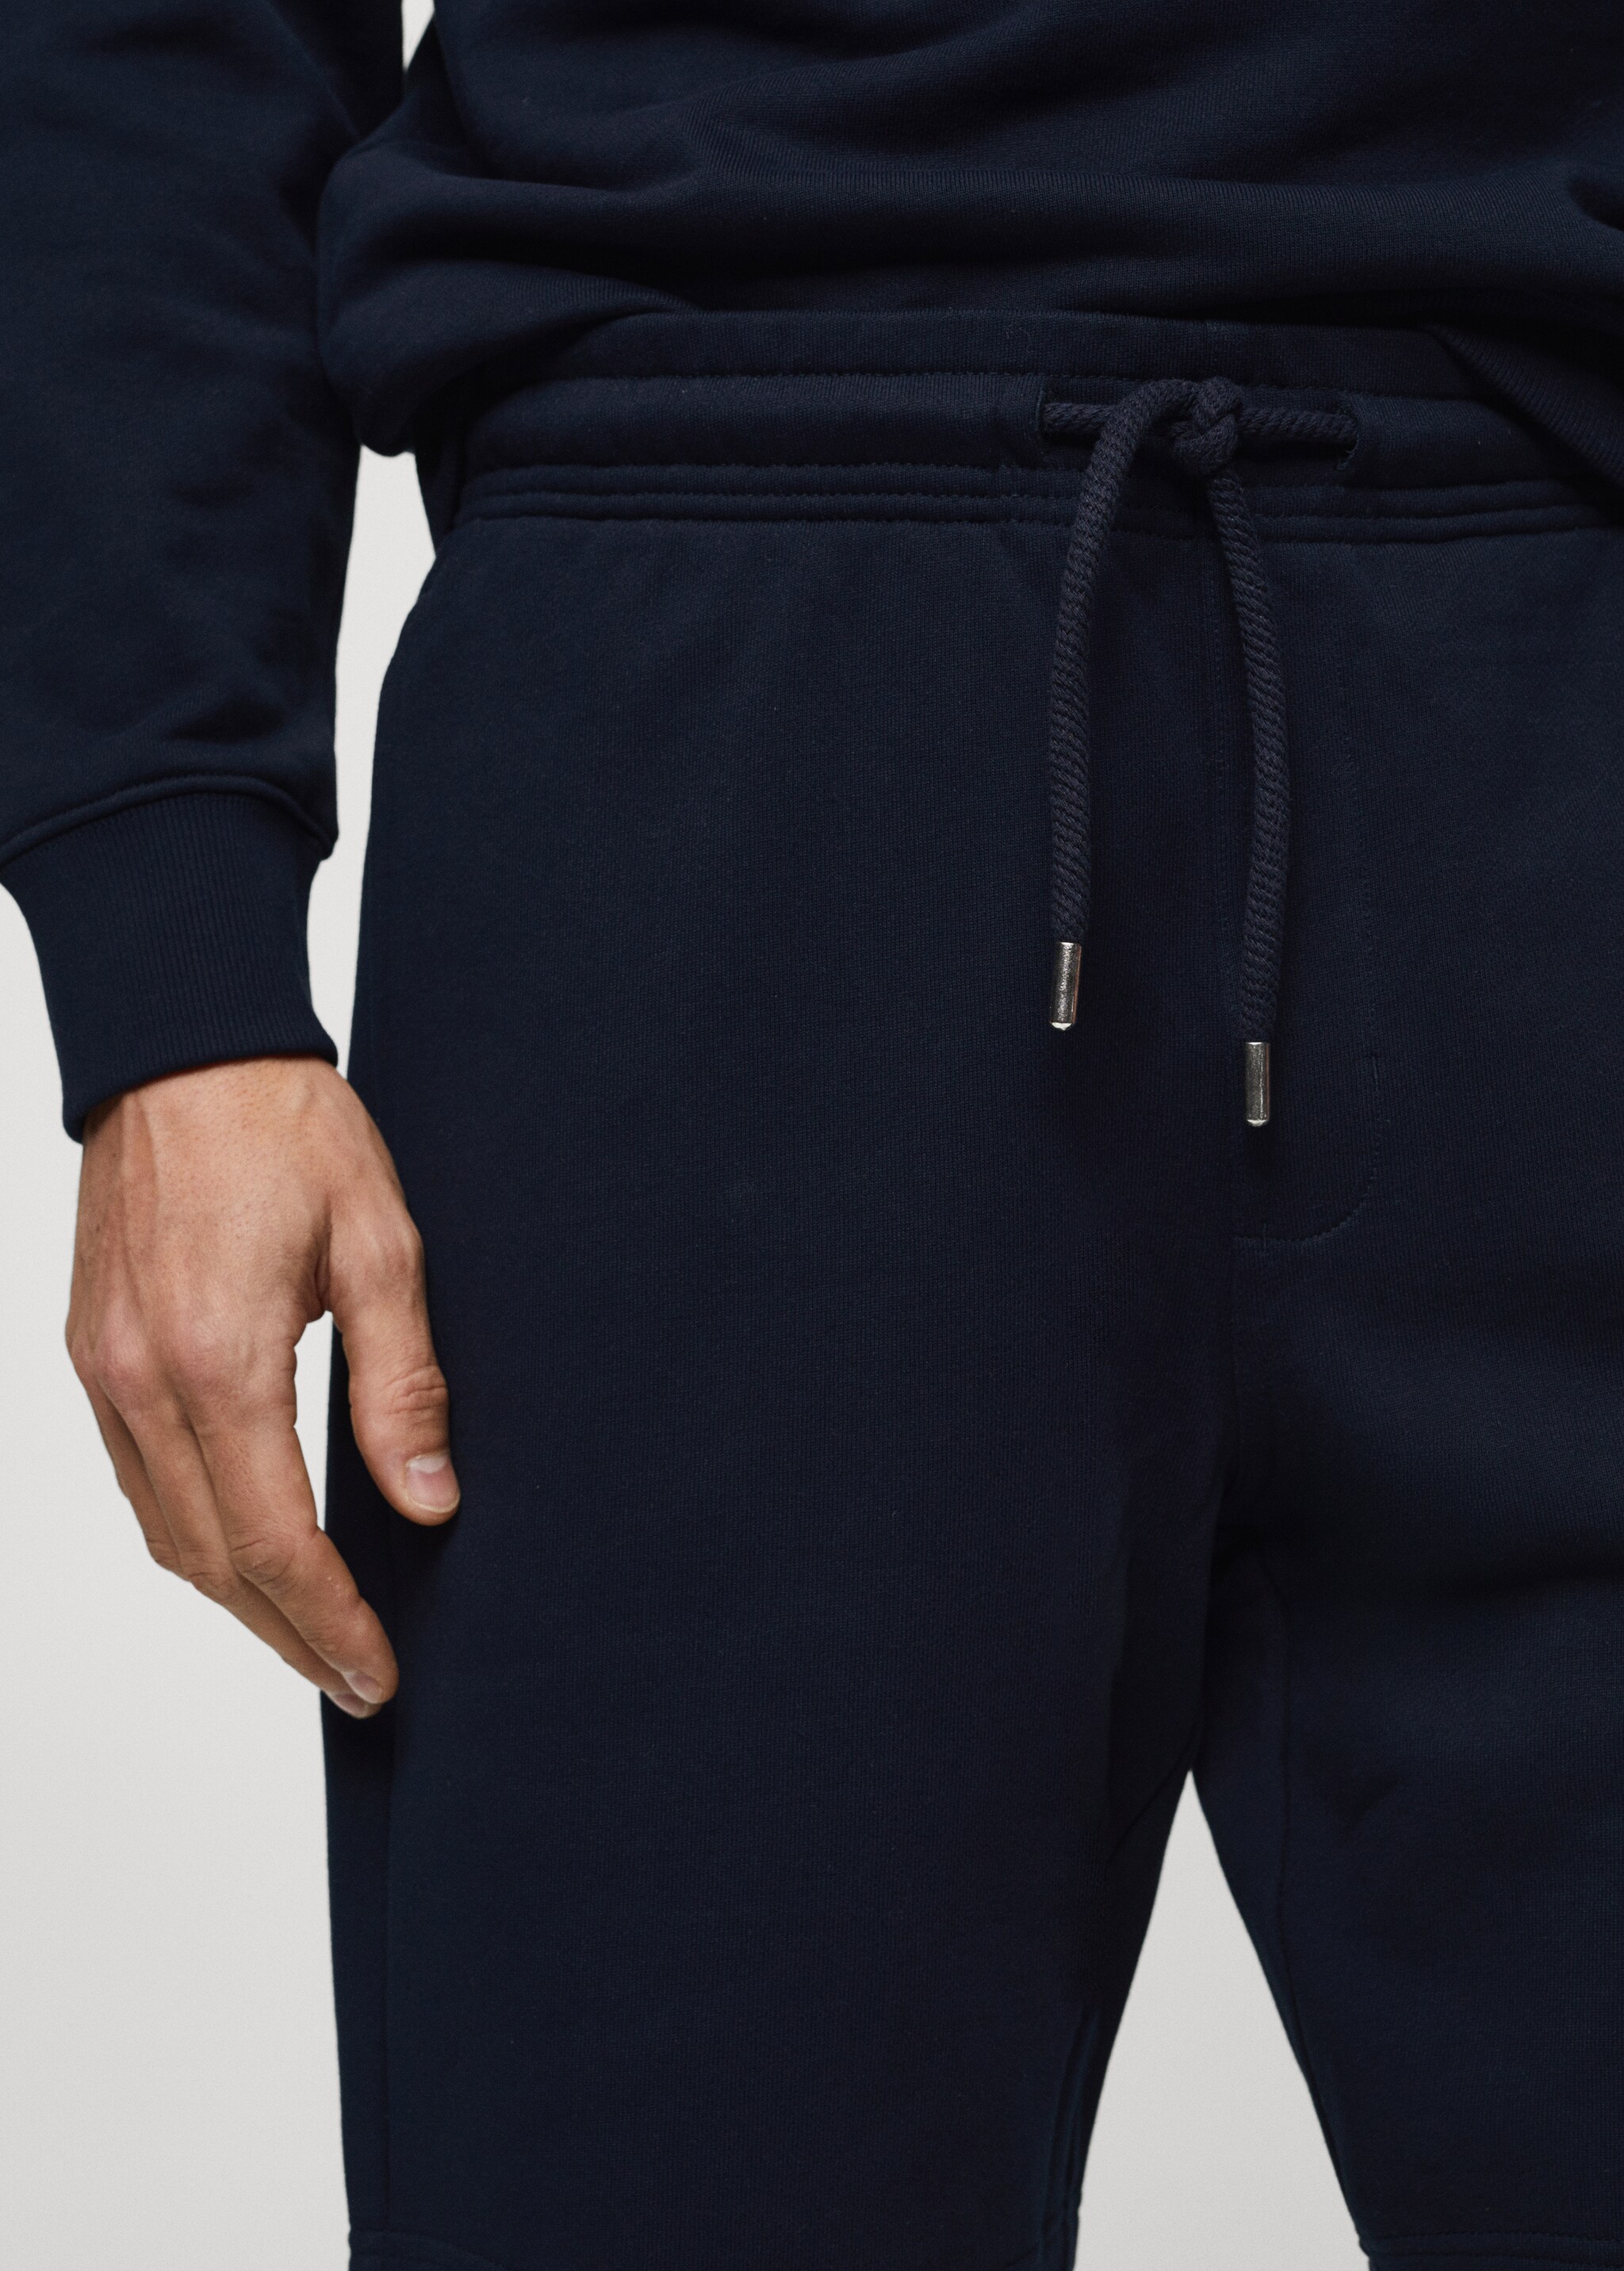 Jogger cotton Bermuda shorts - Details of the article 1